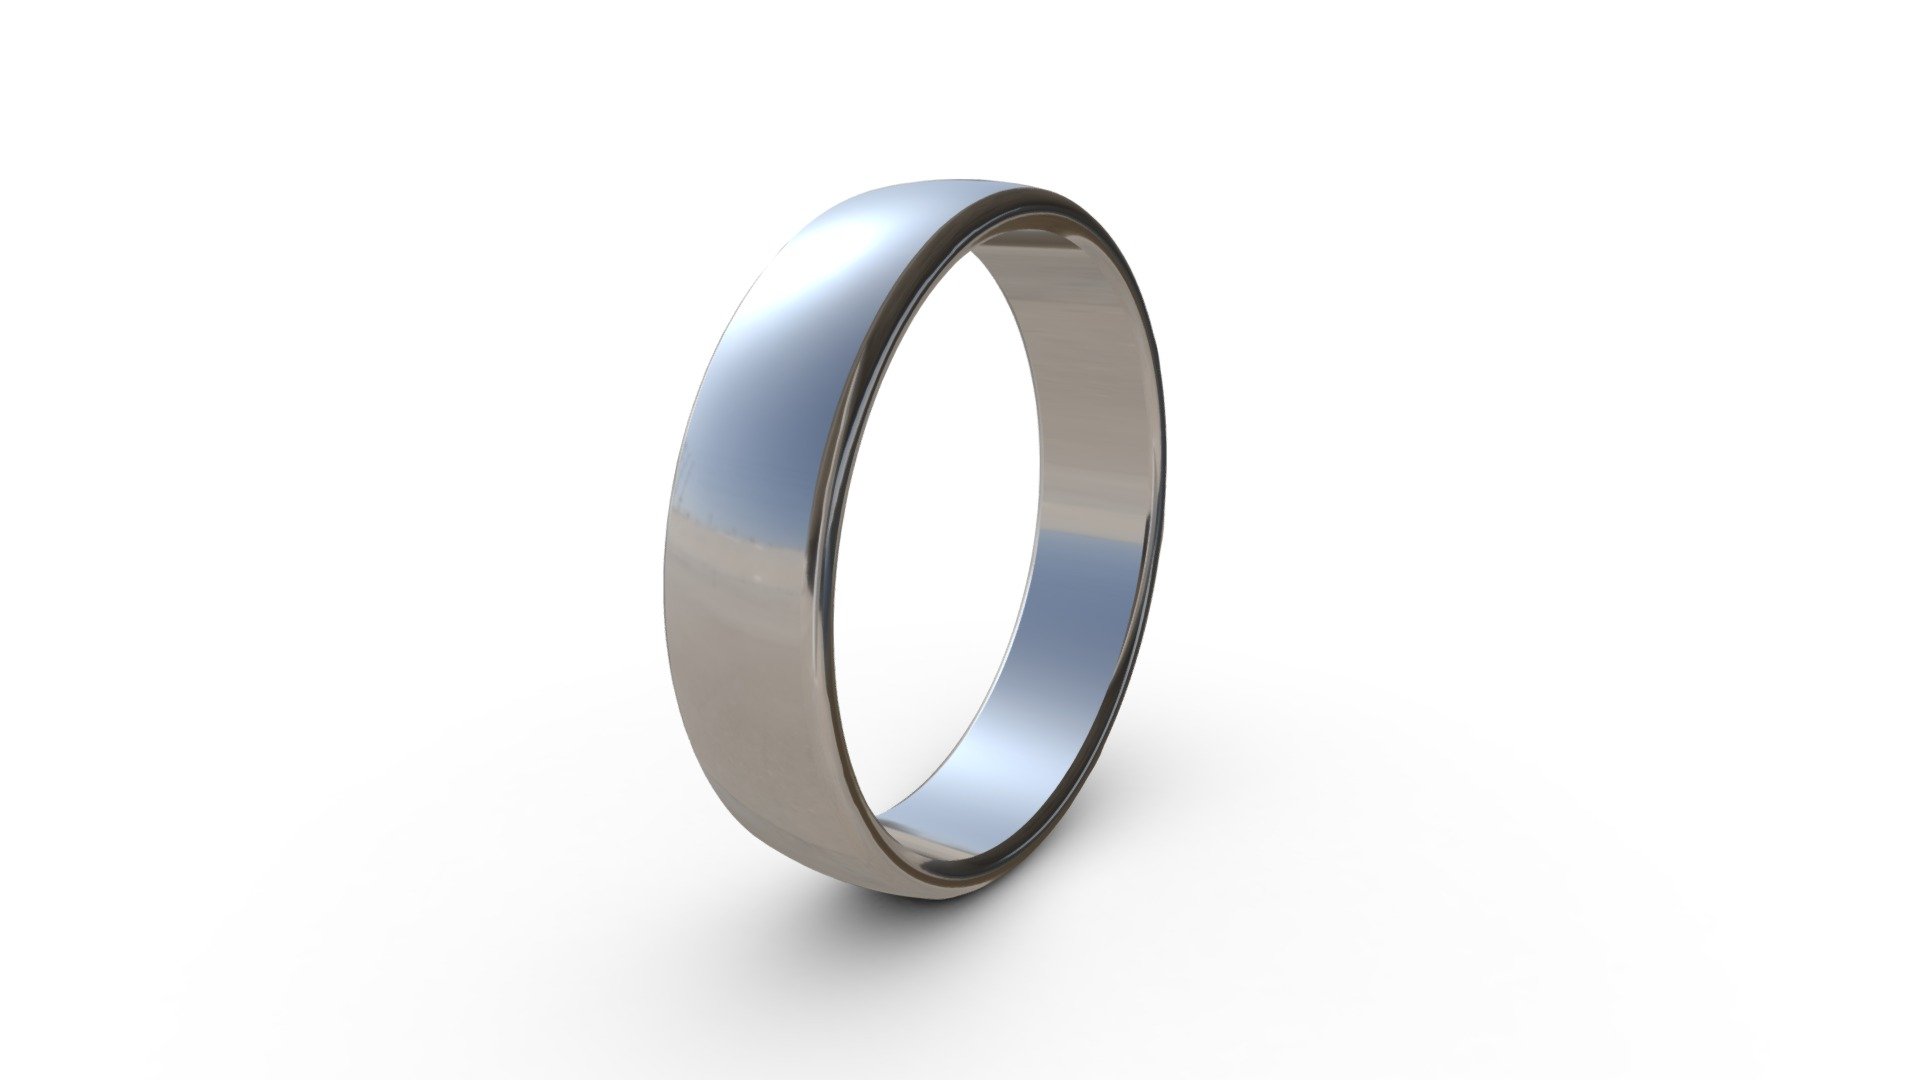 3D modeling a ring on iPad with Shapr3D - YouTube